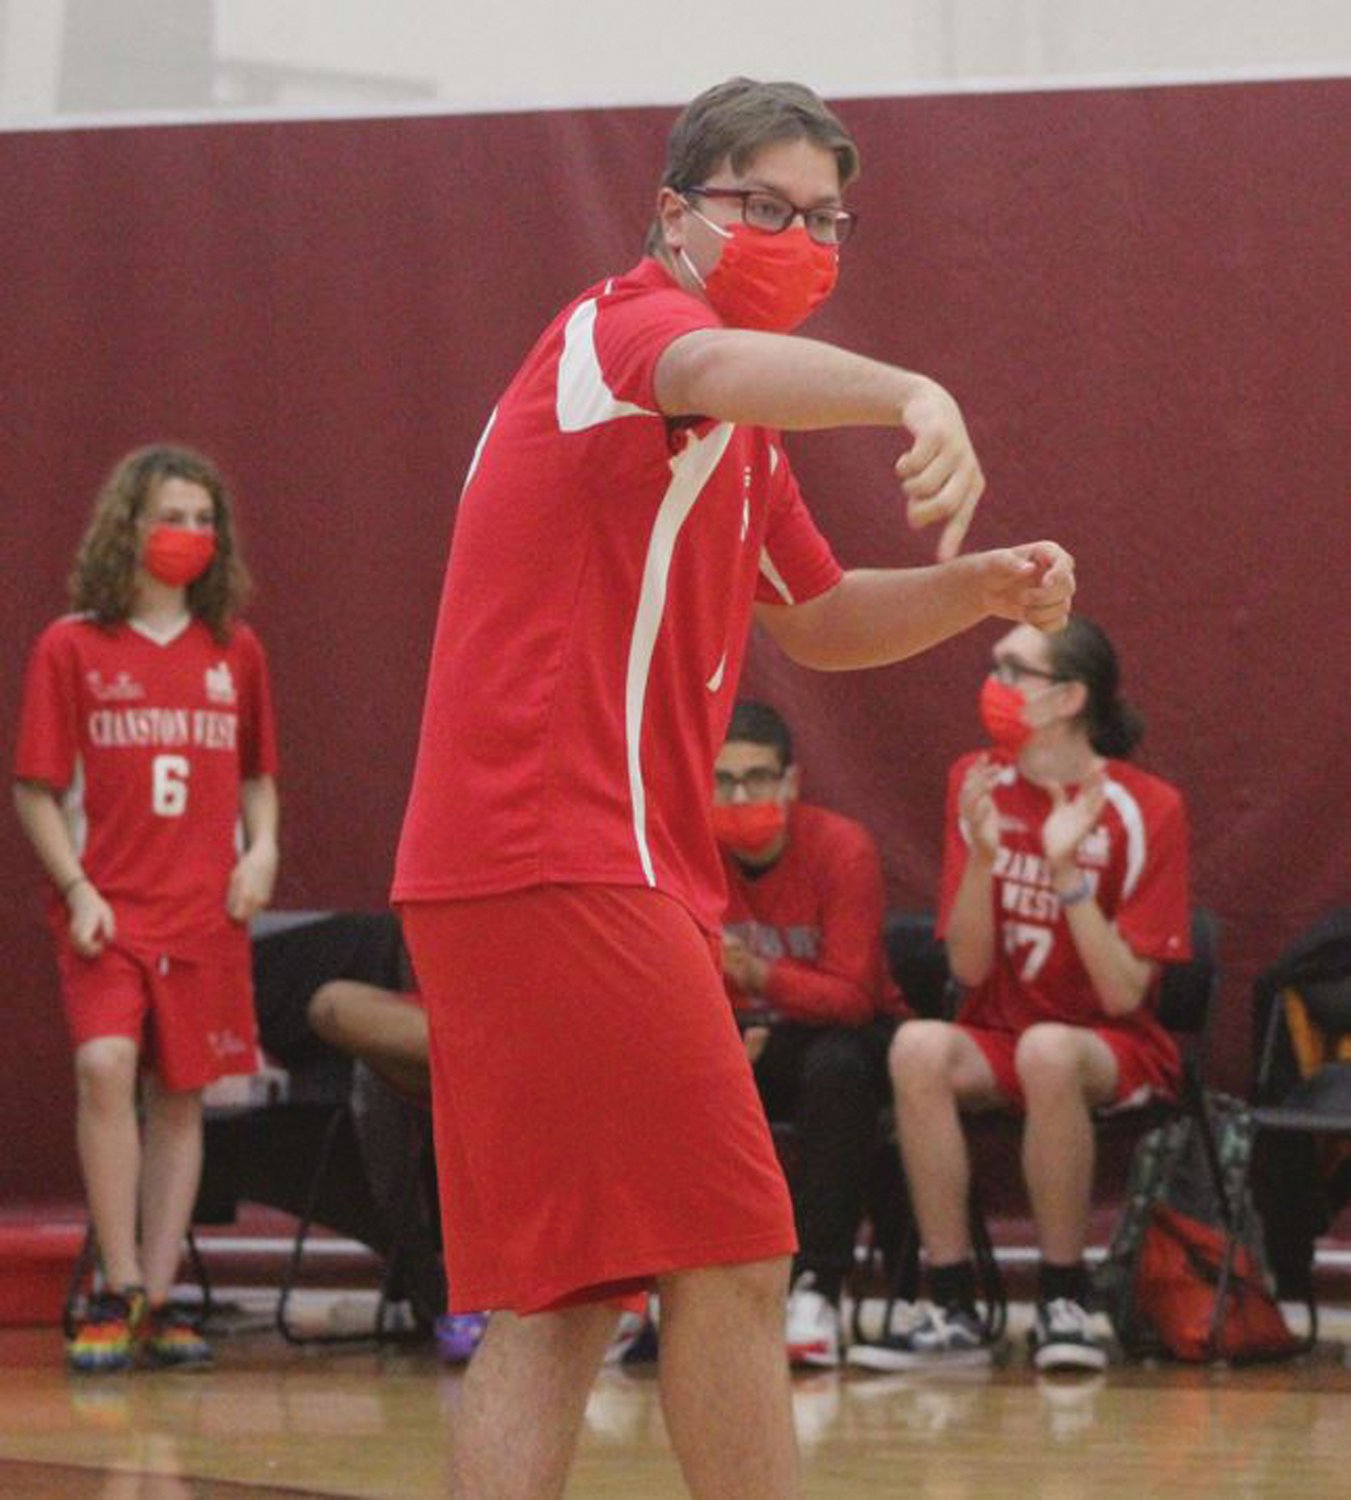 CALLING THE SHOTS: Cranston West’s Billy Ring talks strategy prior to play.